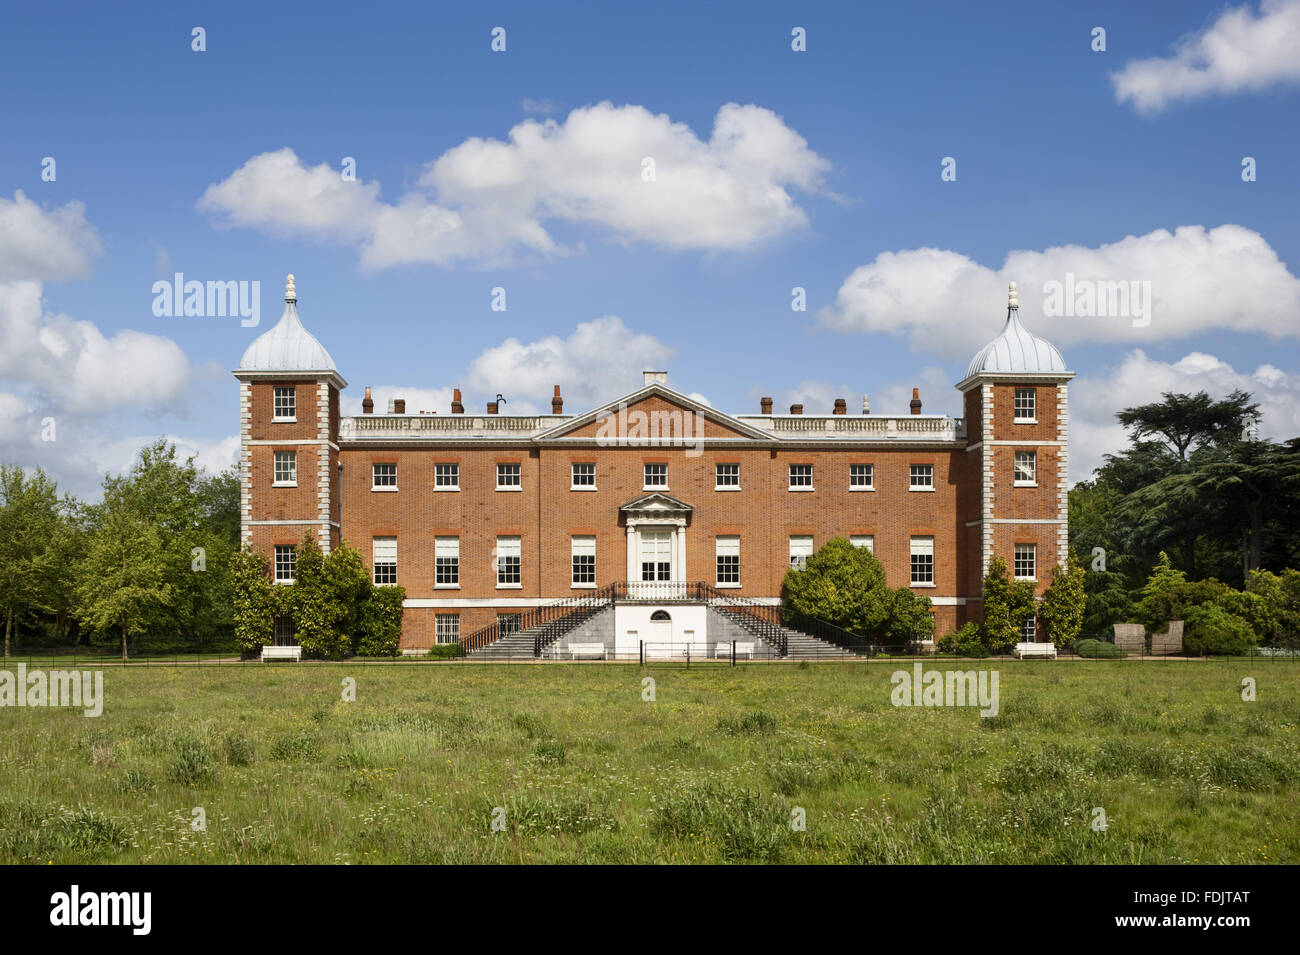 The west or garden front of the house with curved stairs at Osterley, Middlesex. The house was originally Elizabethan, and remodelled in 1760 - 80 by Robert Adam. Stock Photo